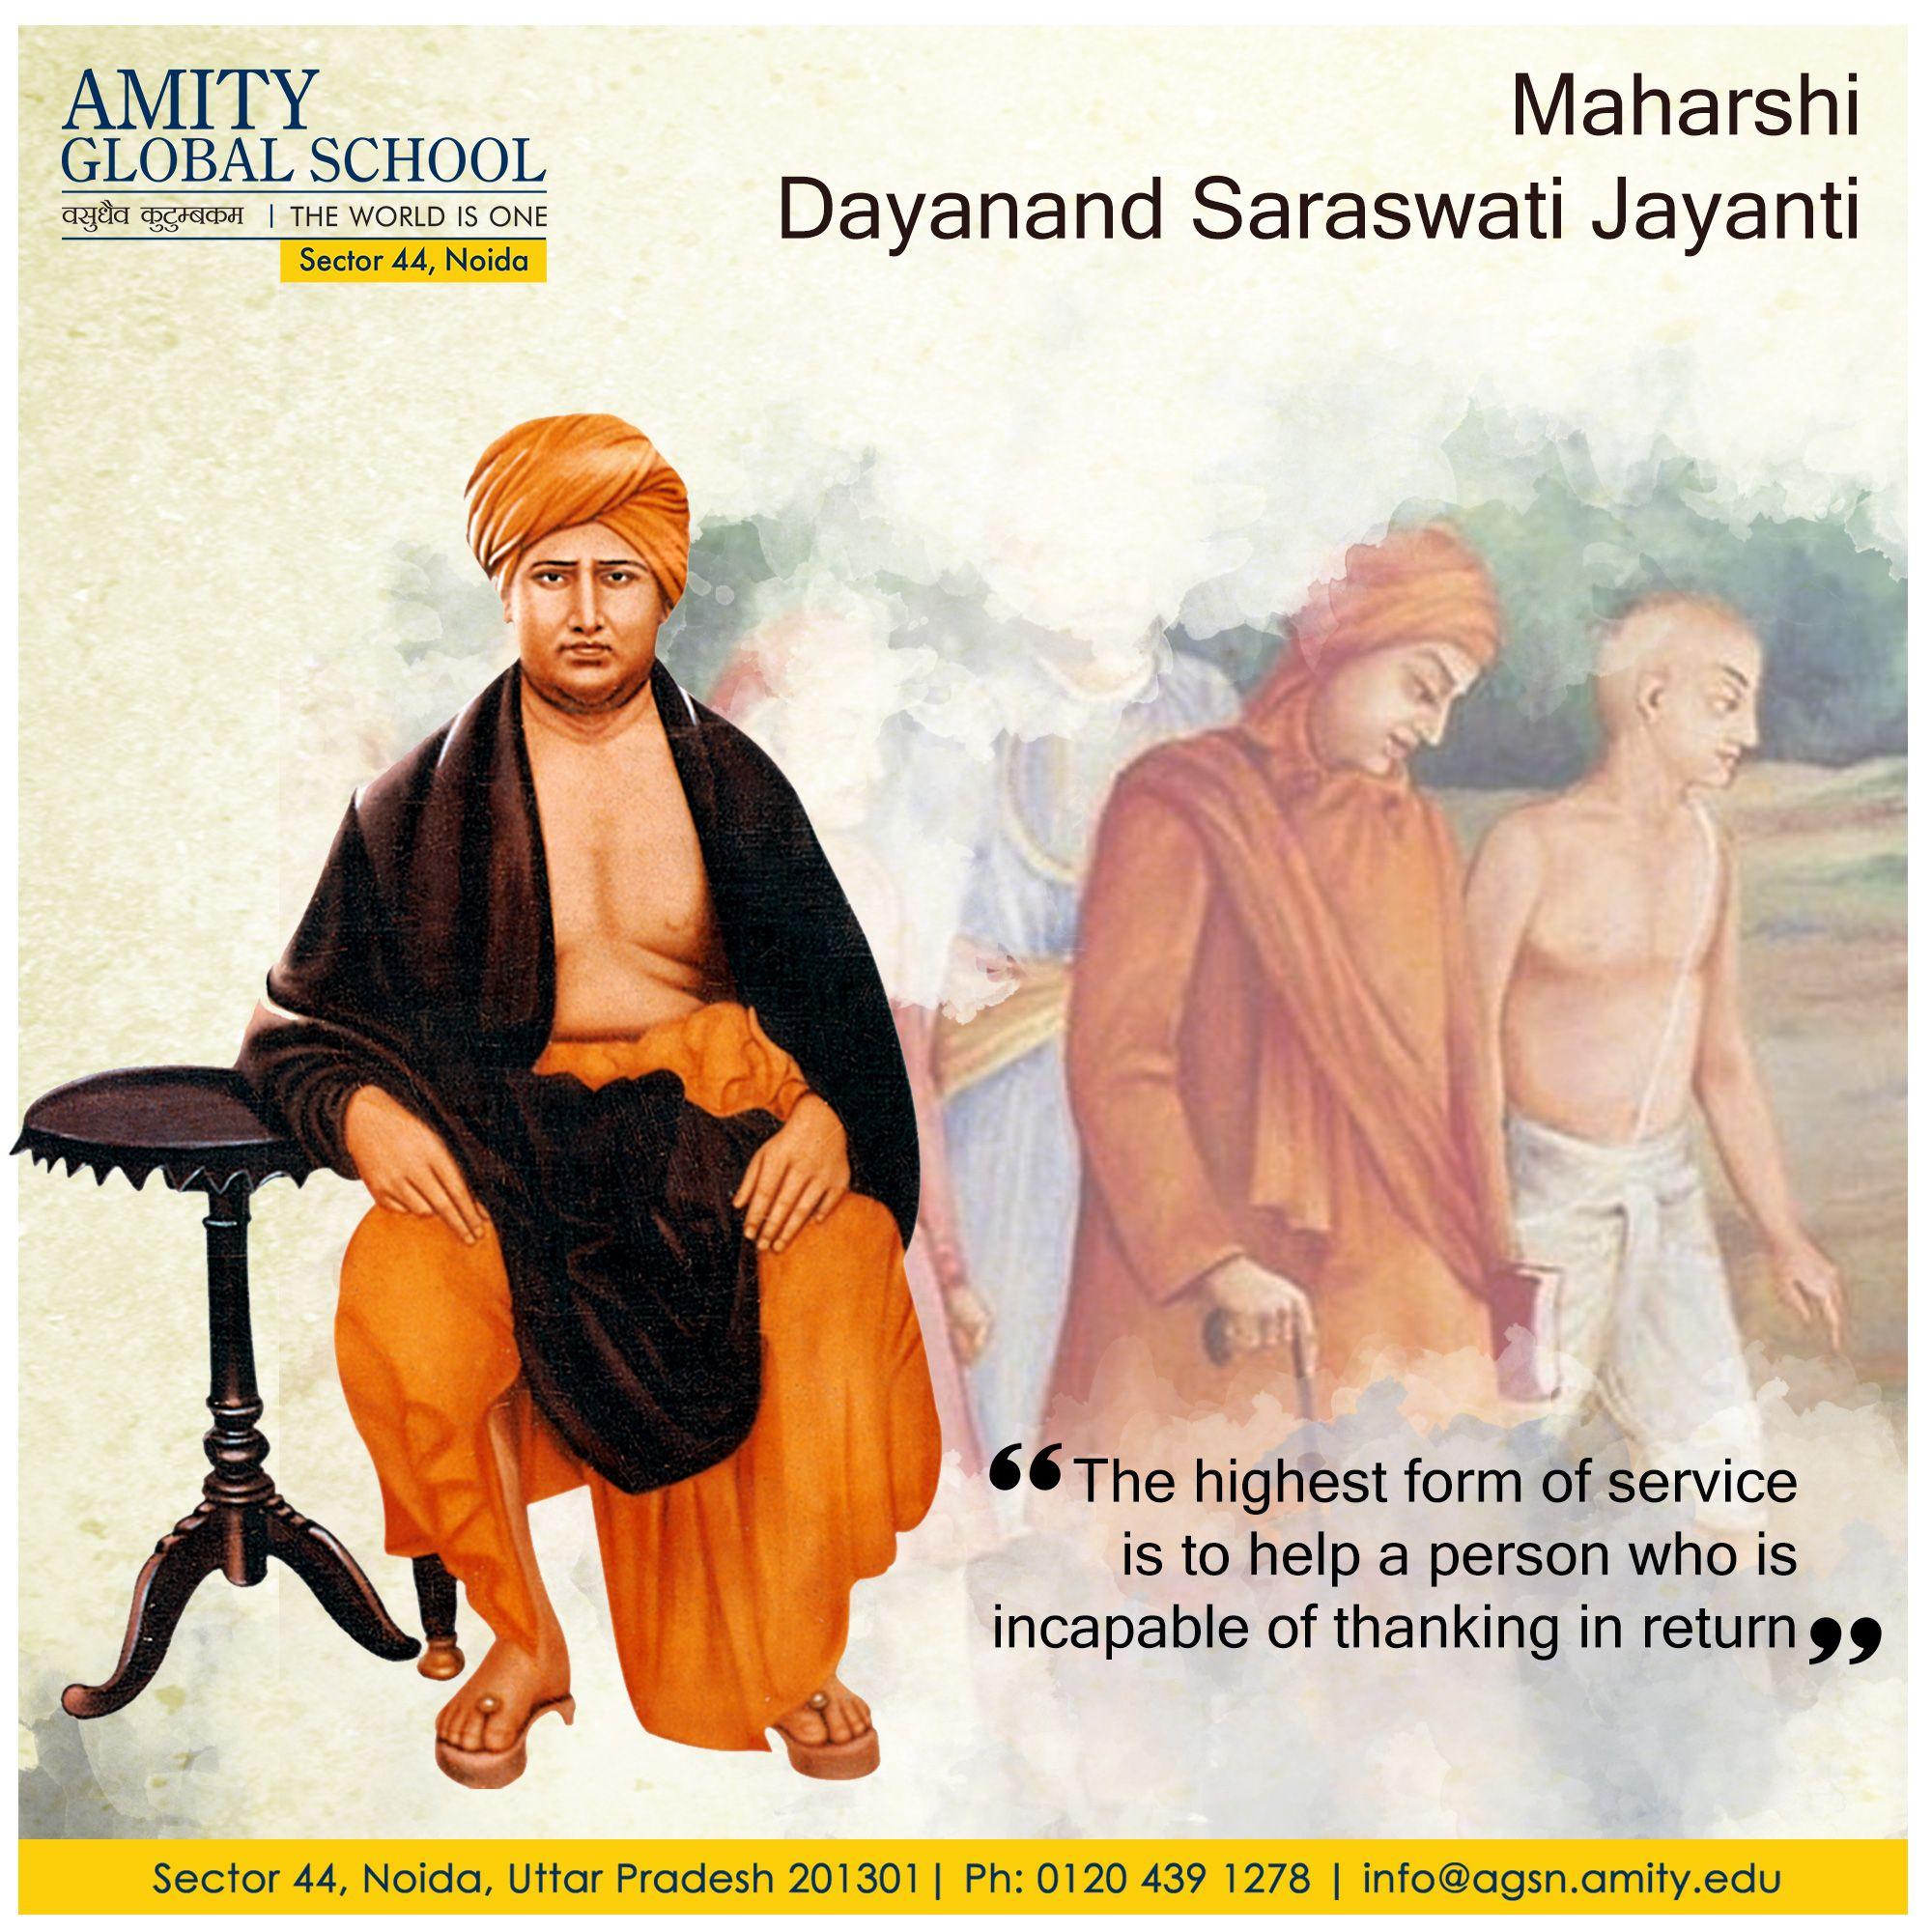 Maharshi Dayanand Saraswati Jayanti is a day to pay tribute to